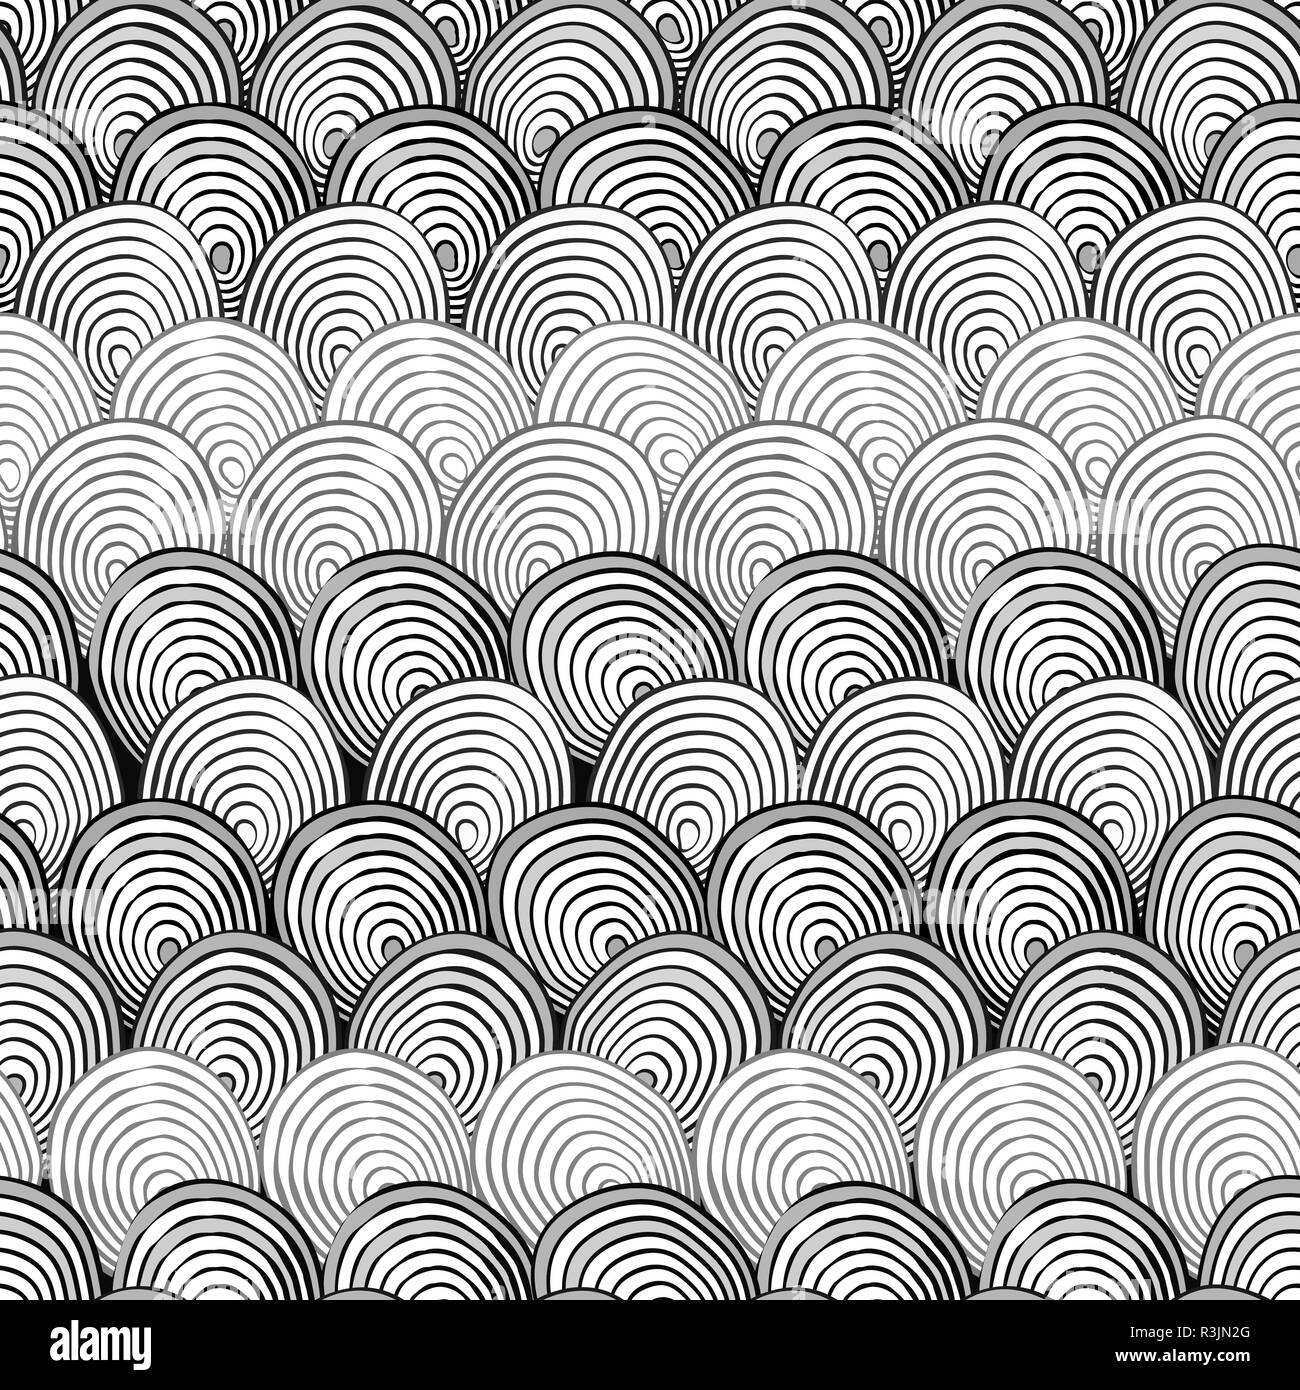 Black and white pattern with abstract fishscales. Can be used for ...